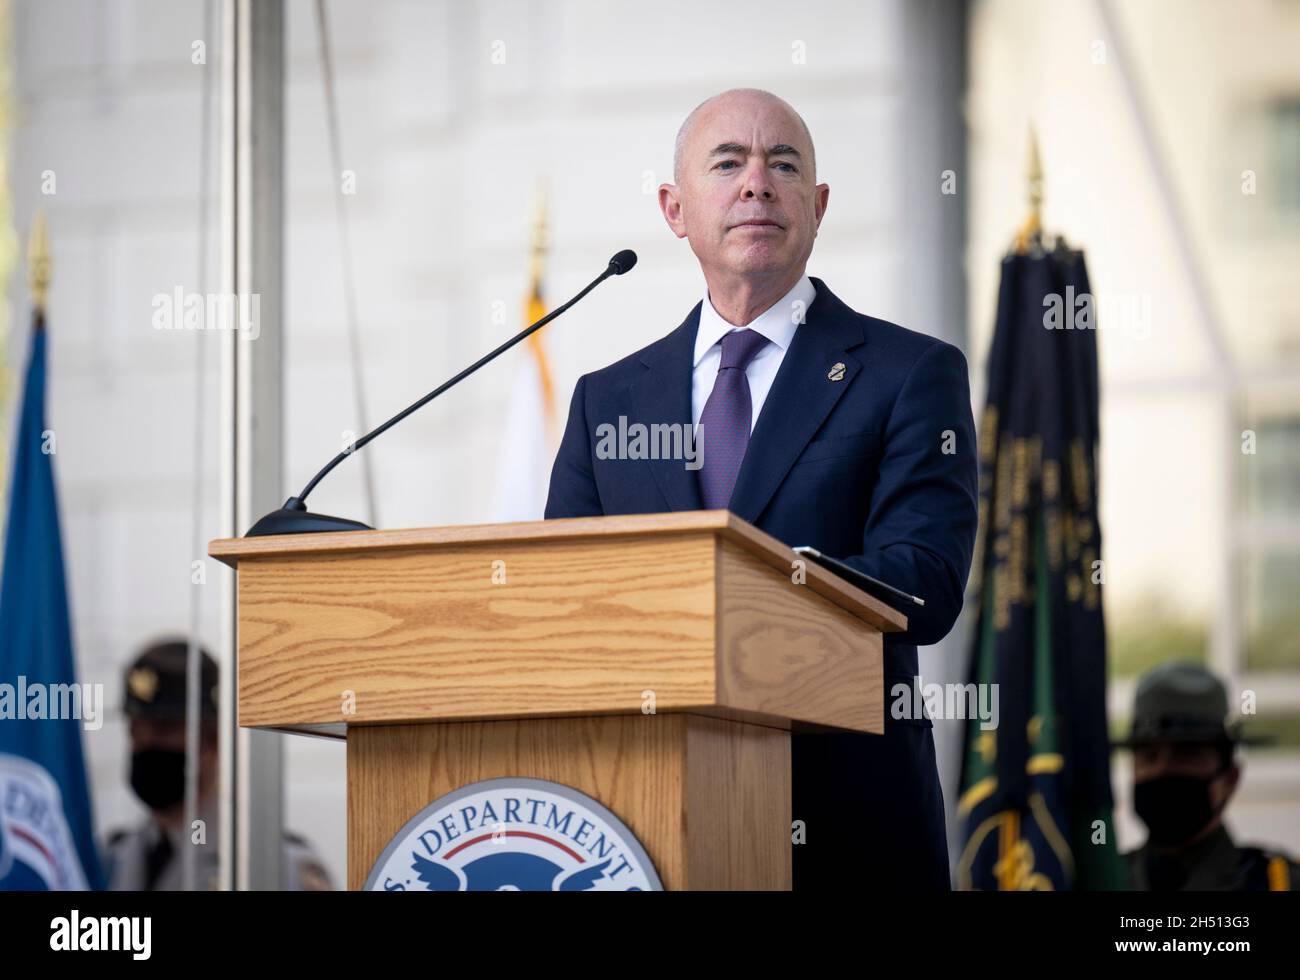 Washington, United States of America. 15 October, 2021. U.S Homeland Security Secretary Alejandro Mayorkas addresses a ceremony honoring Custom and Border Patrol agents killed in the line of duty at the Valor Memorial and Wreath Laying Ceremony October 15, 2021 in Washington, D.C.Credit: Benjamin Applebaum/Homeland Security/Alamy Live News Stock Photo